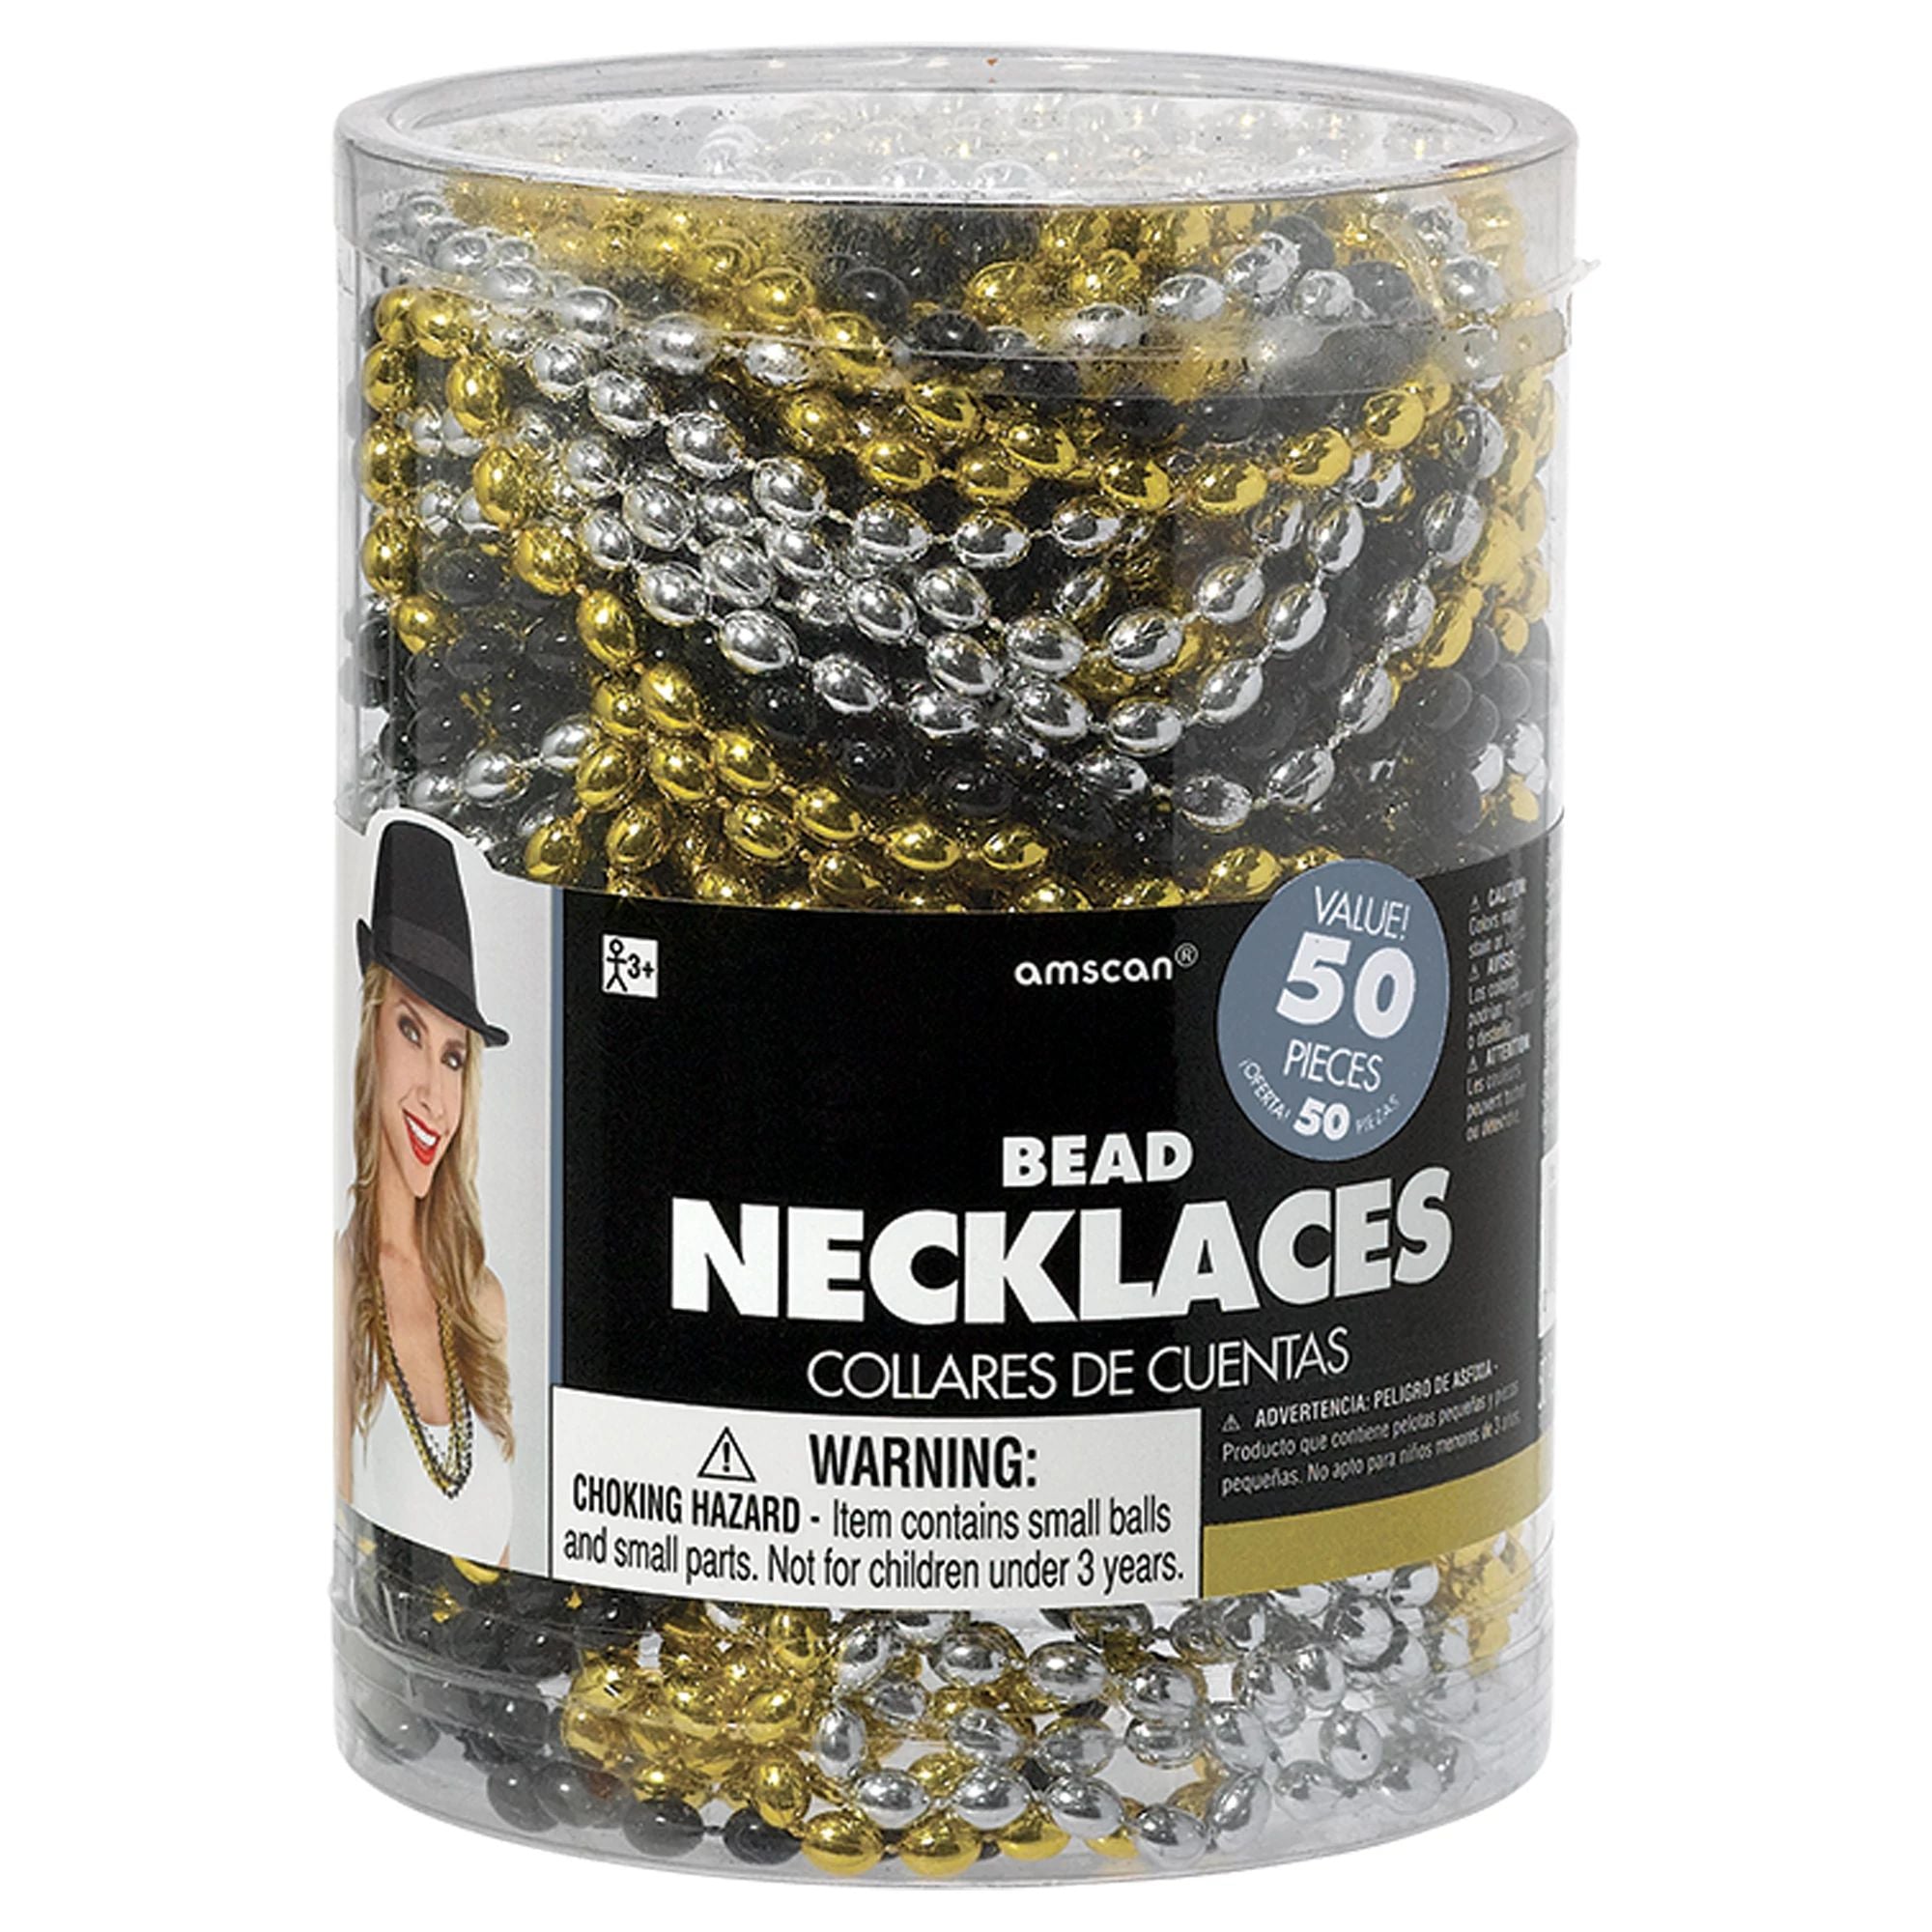 Amscan HOLIDAY: NEW YEAR'S Bead Necklace - Black, Silver, Gold